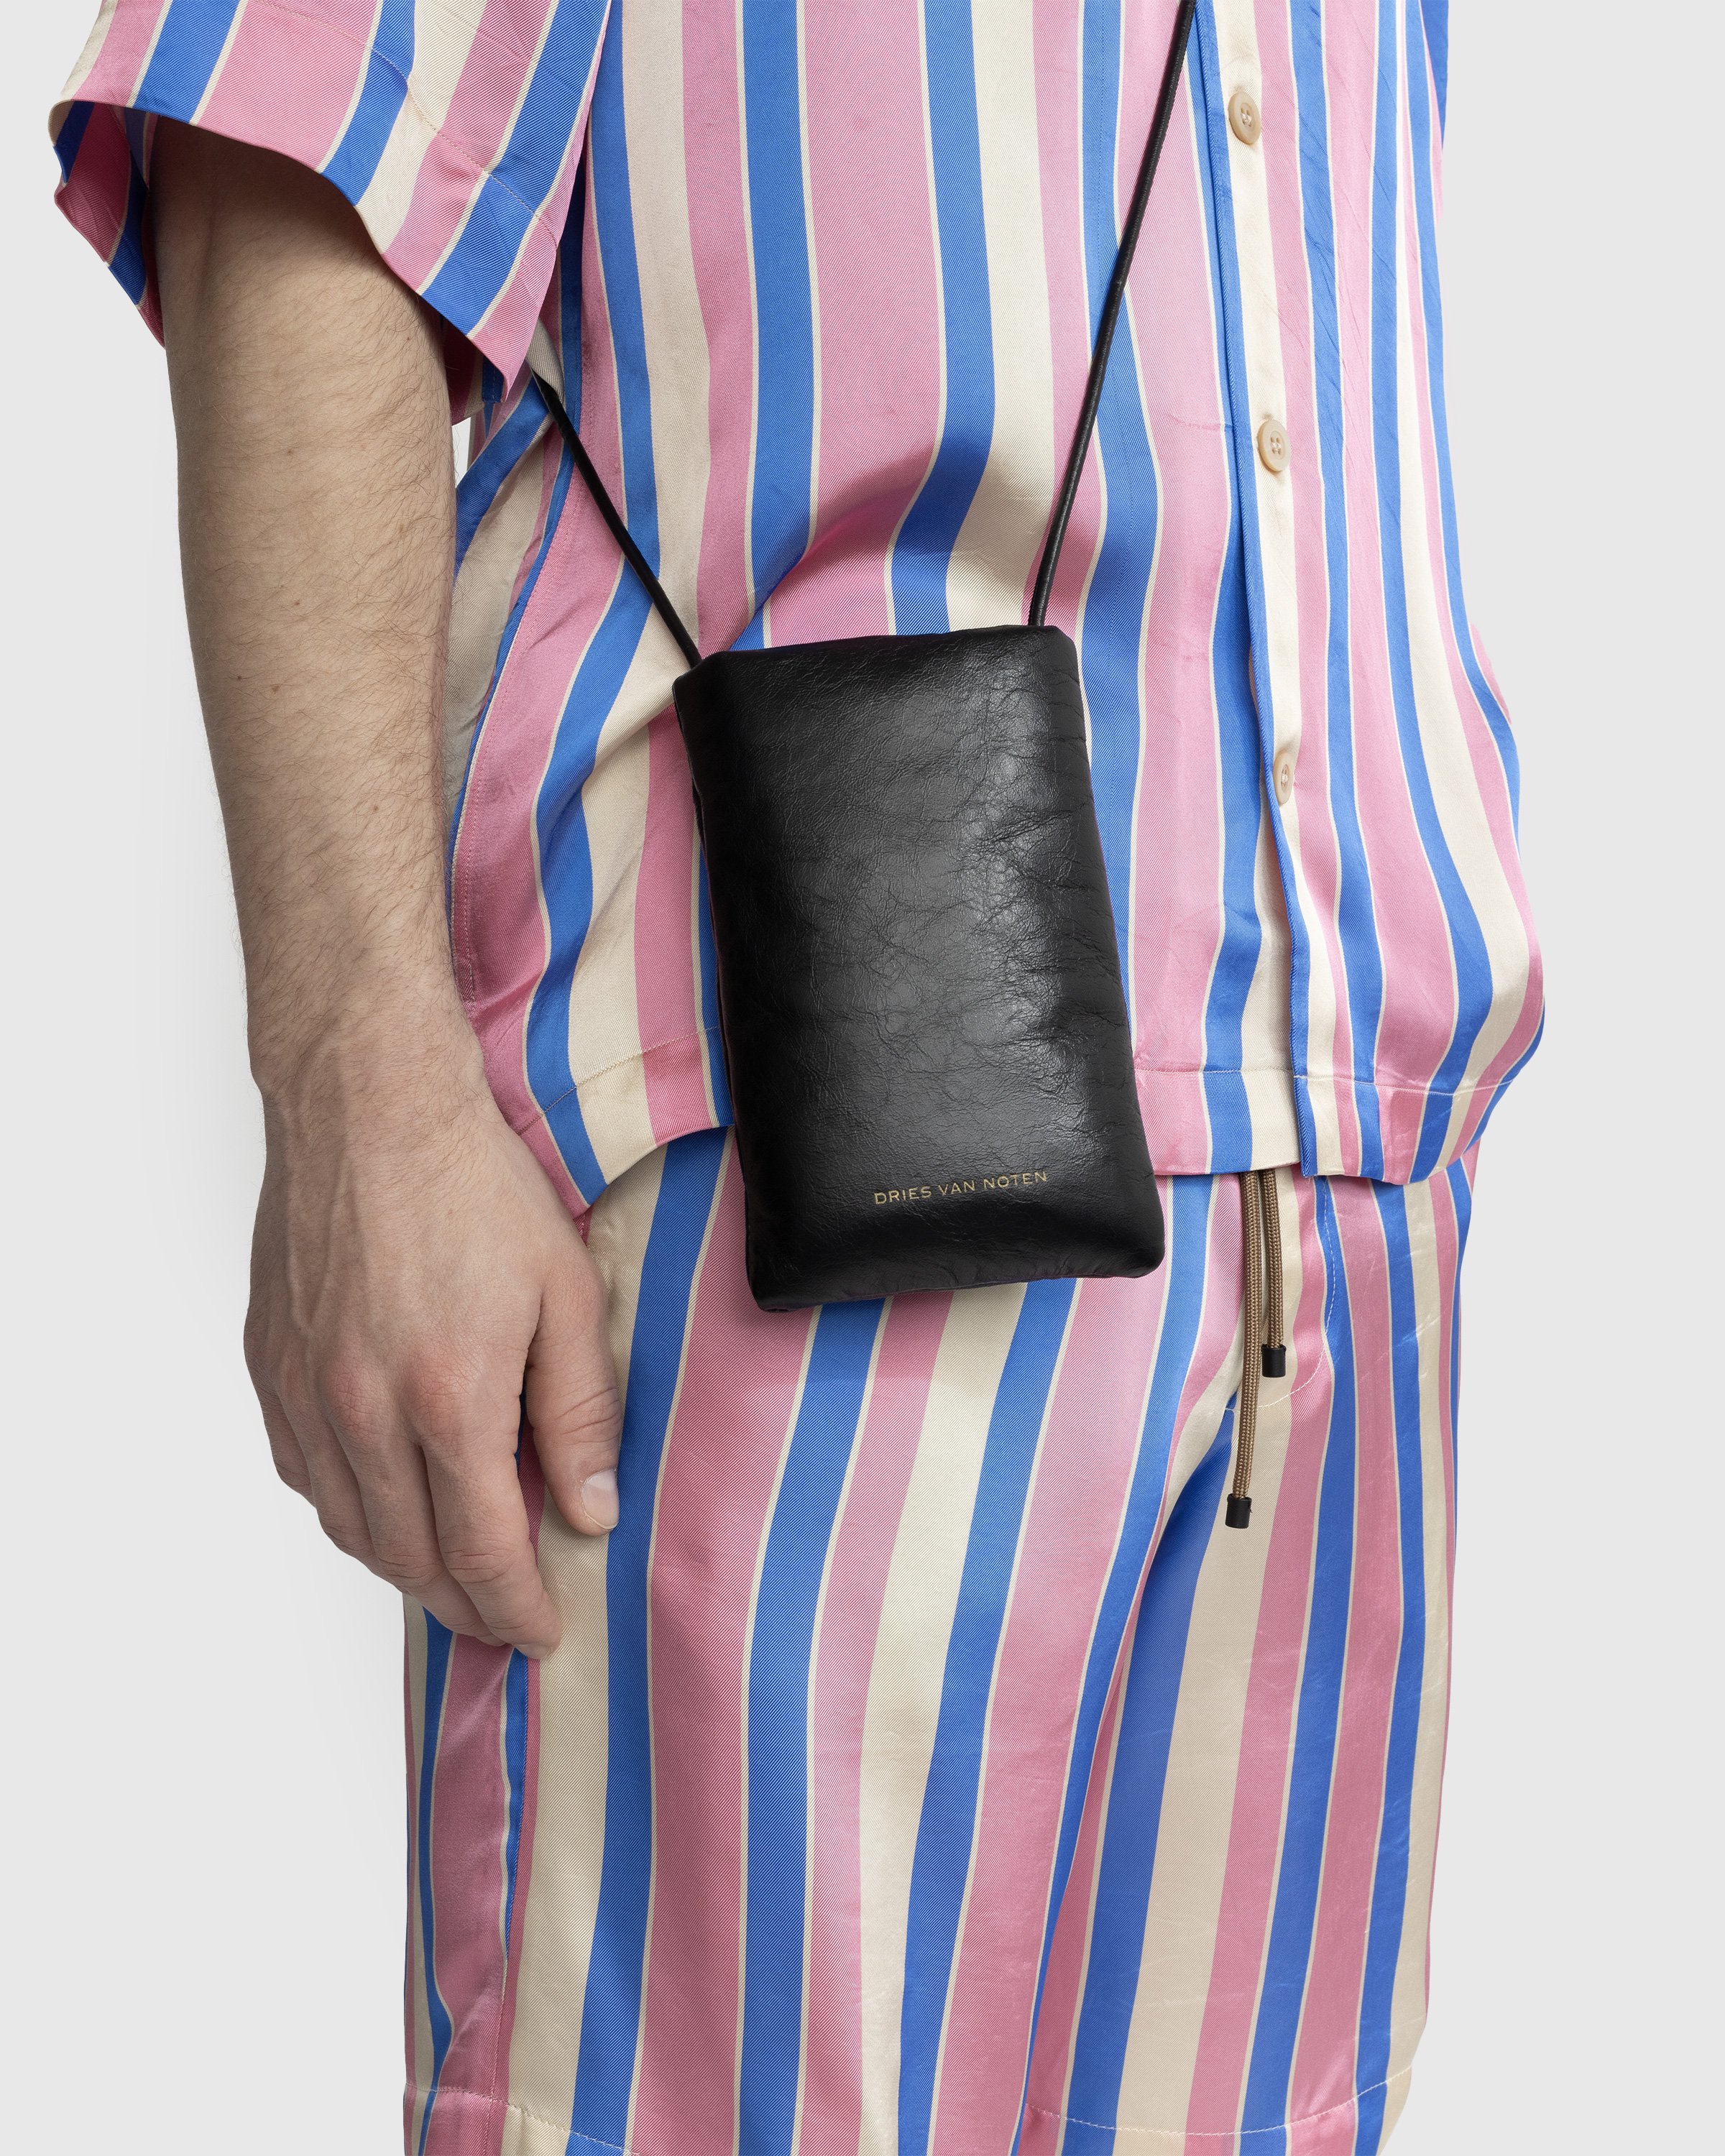 Dries van Noten - Leather Phone and Card Pouch Black - Lifestyle - Black - Image 5